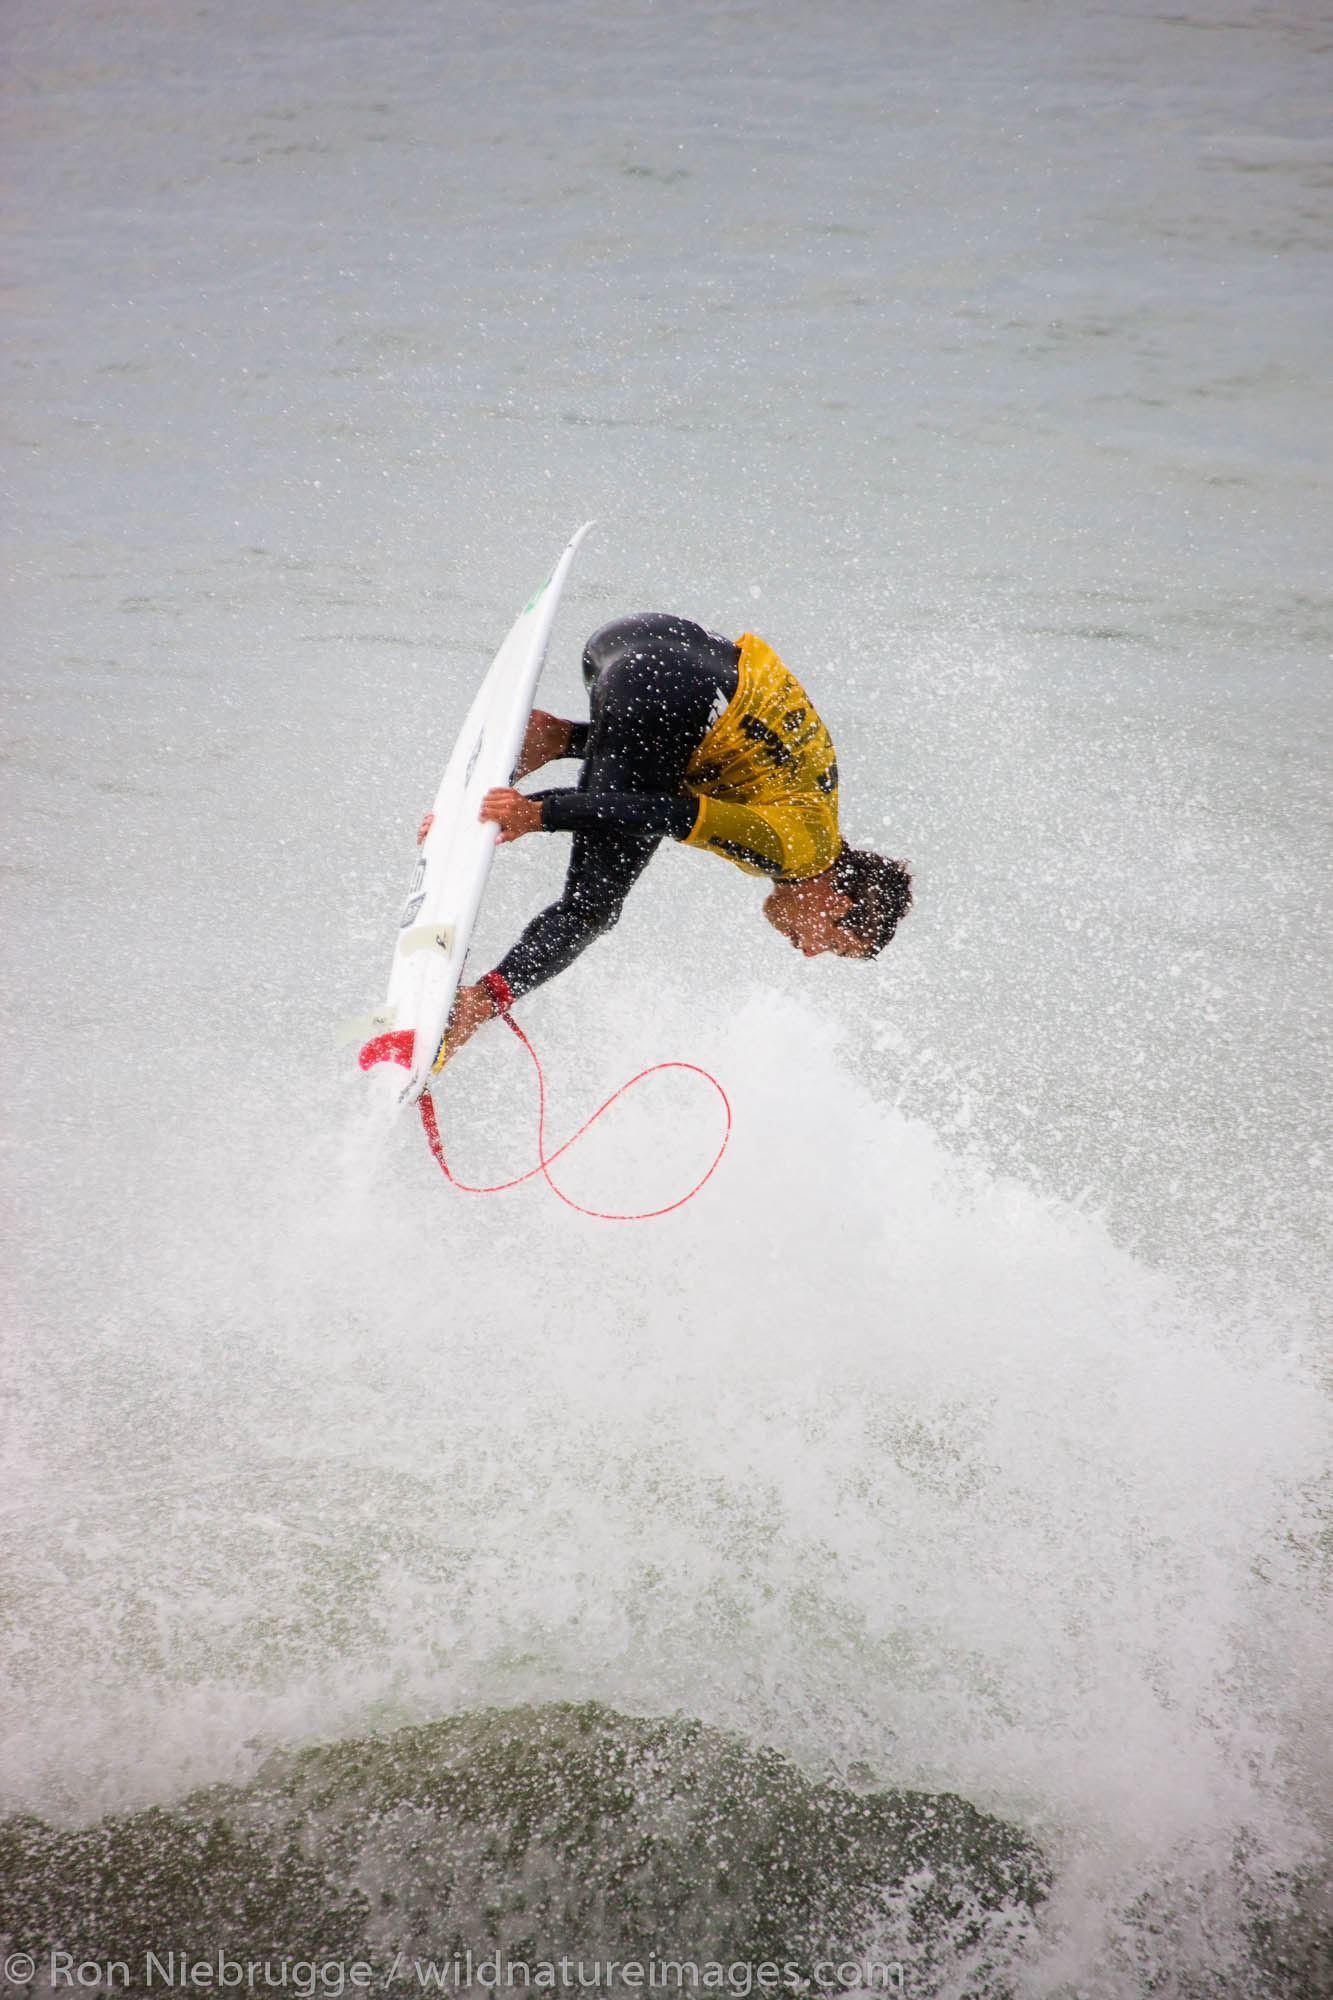 Chris Waring competing in the Katin Pro/Am surf competition at Huntington Beach Pier, Orange County, California.